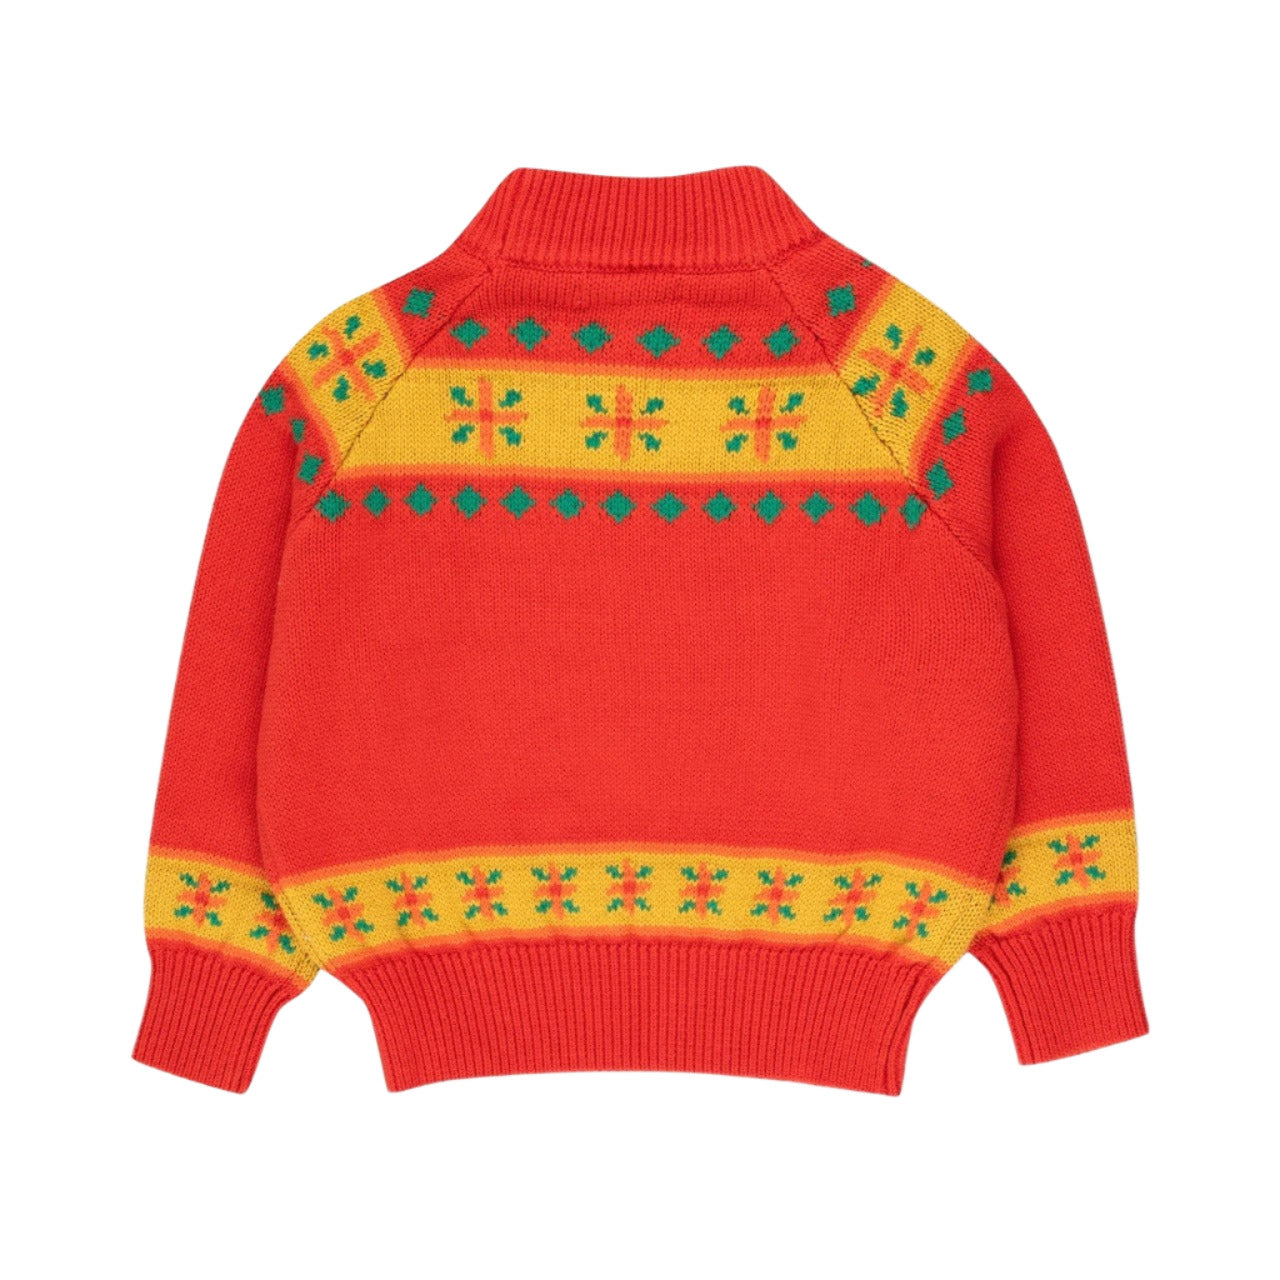 TINYCOTTONS Folky Mockneck Sweater ALWAYS SHOW